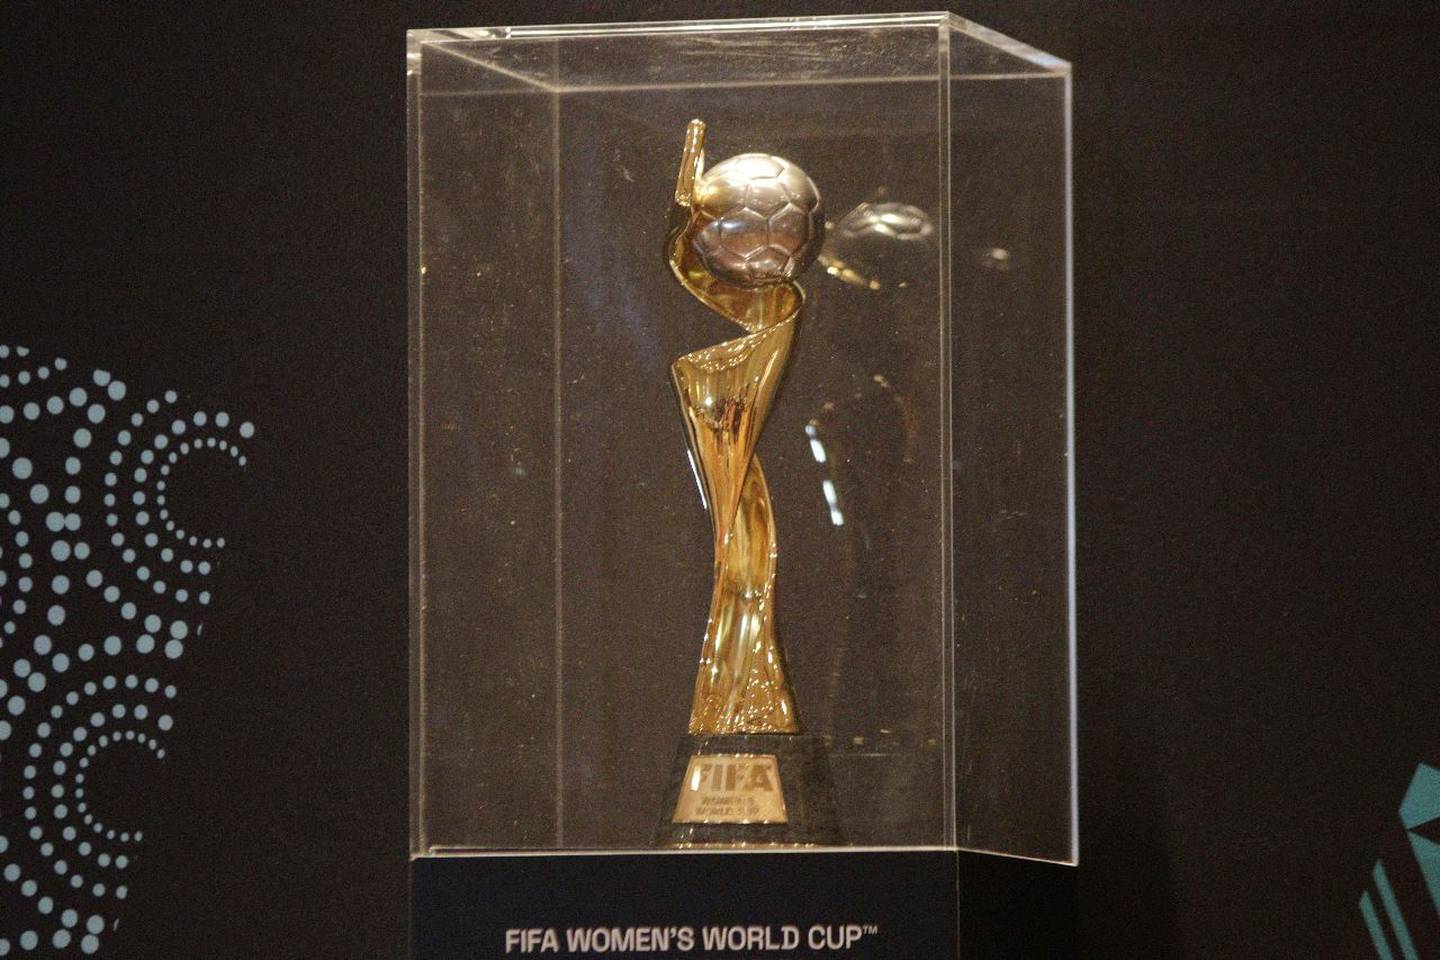 The trophy of the largest sporting event in the world visited Cali, a sports city, as part of the tour they will carry out through the 32 countries that qualified for the 2023 Women's World Cup.